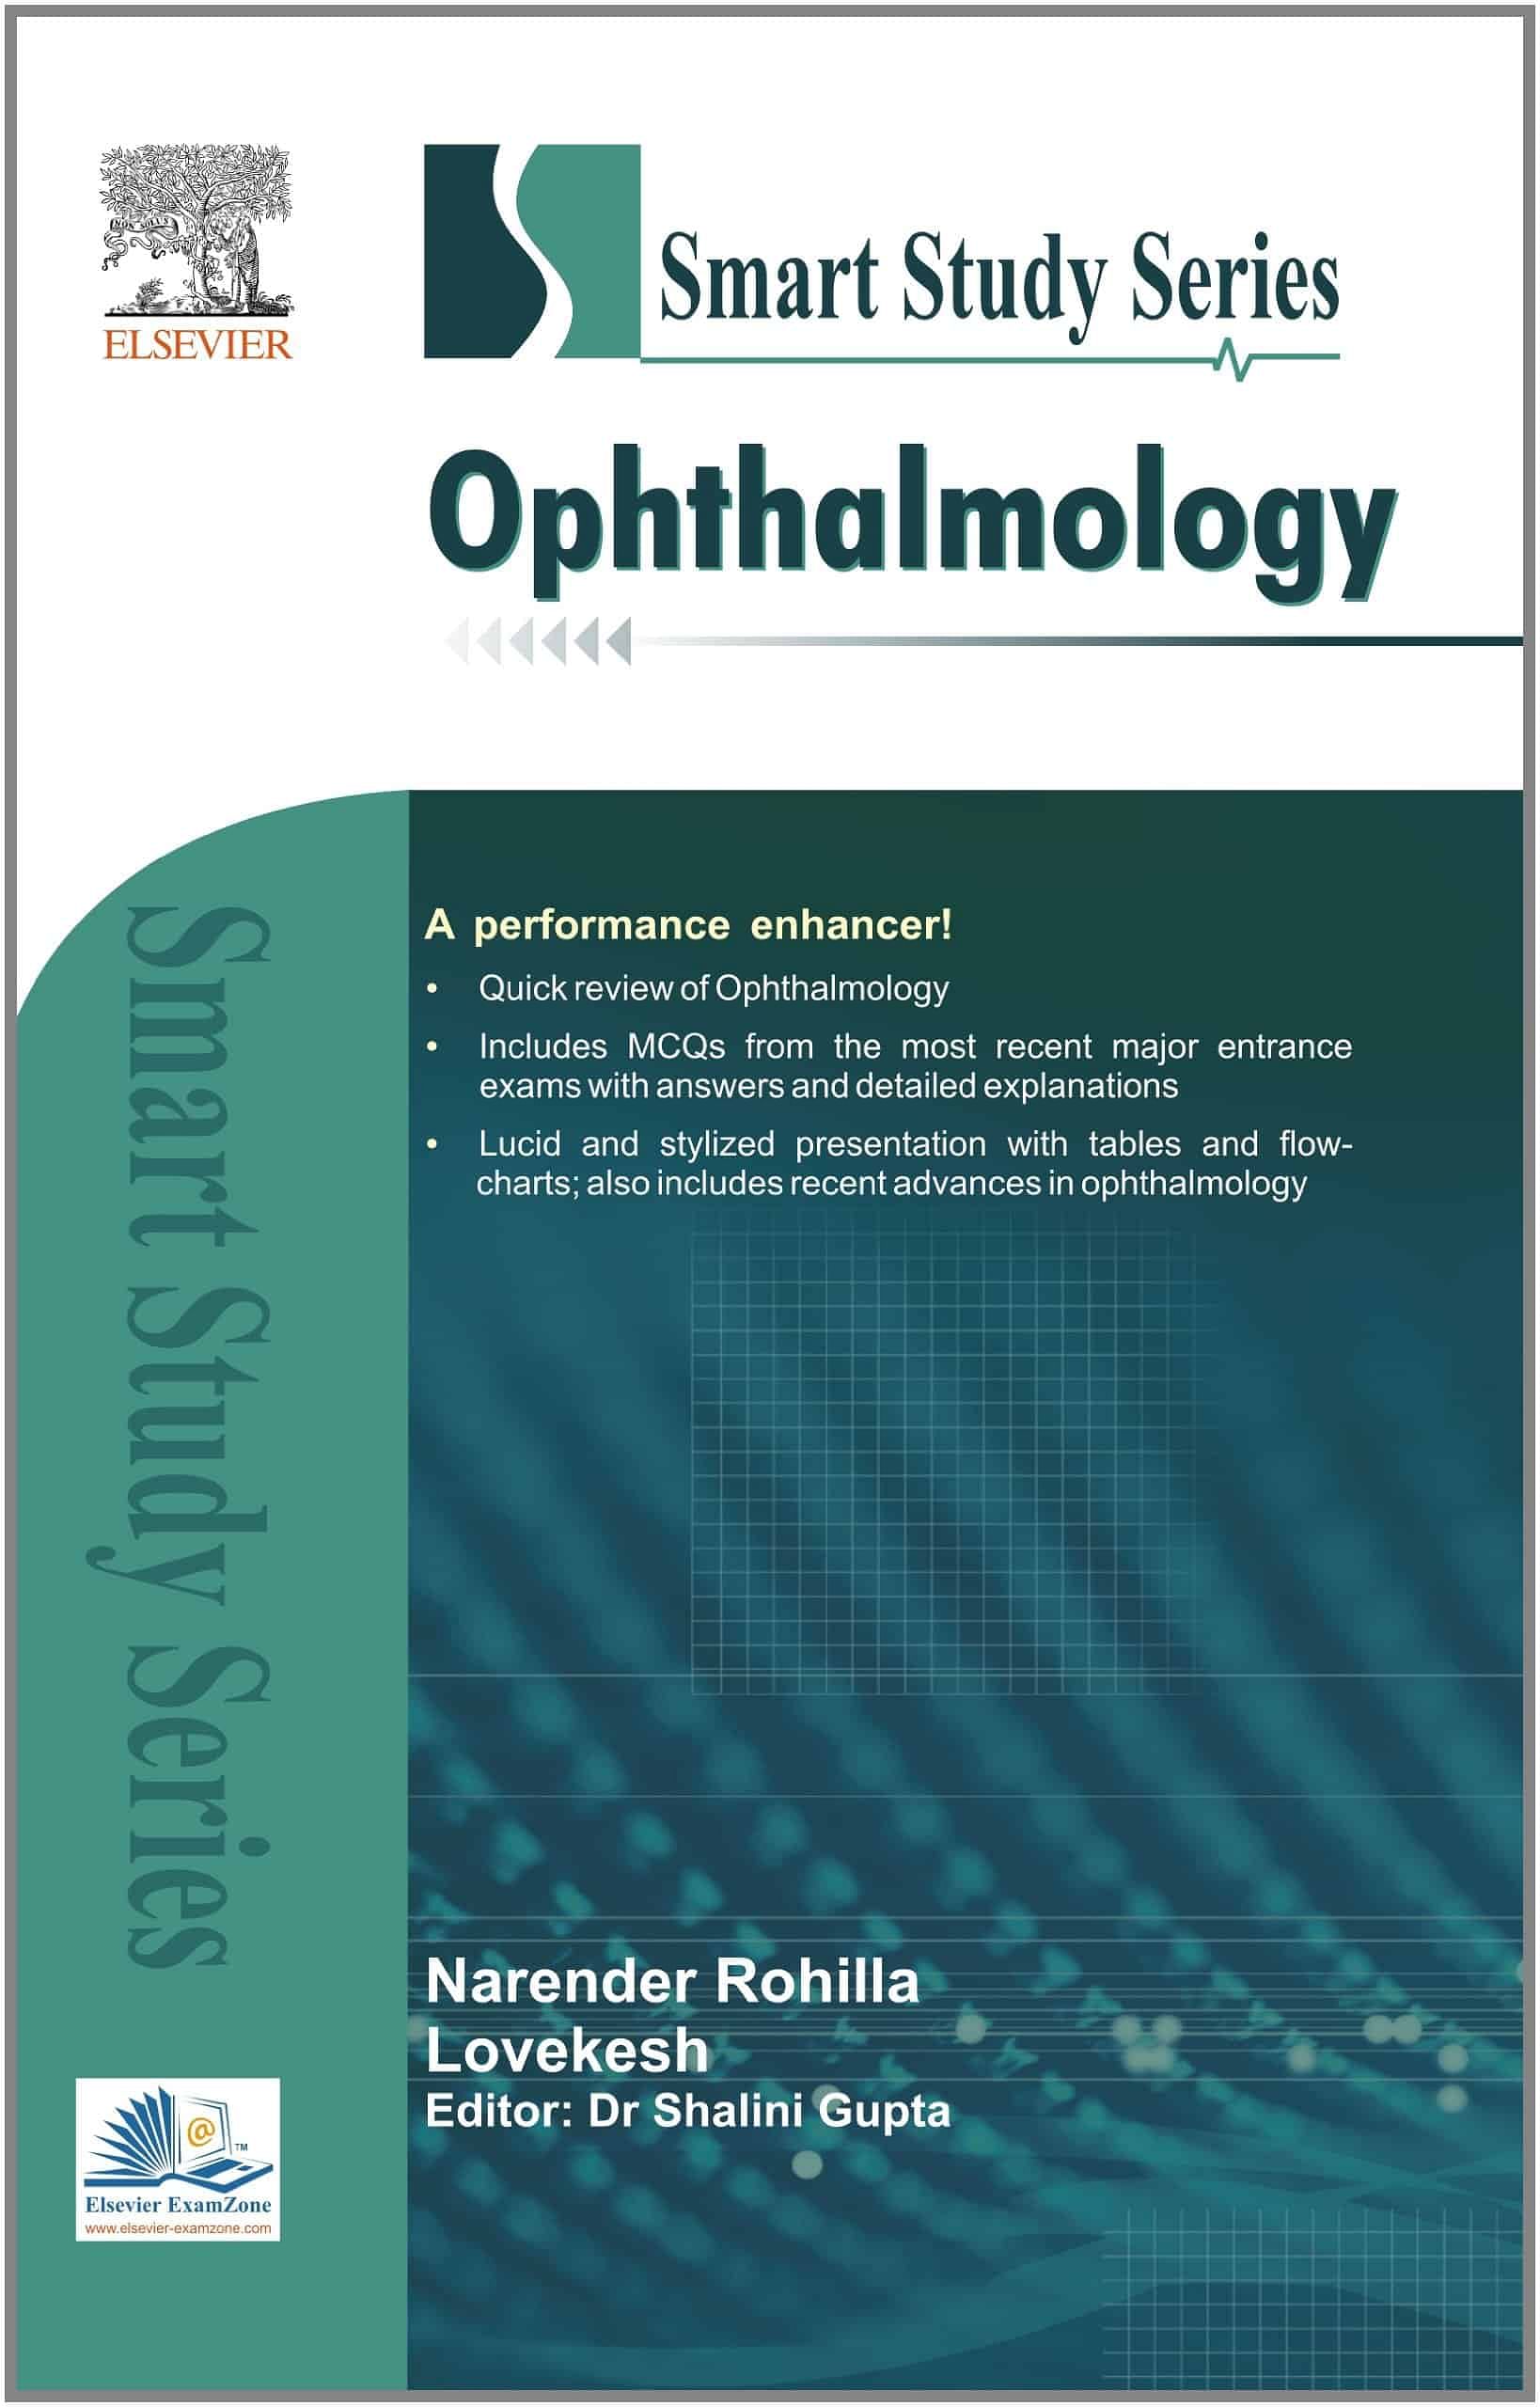 Smart Study Series: Ophthalmology by Dr. Lovekesh & Dr. Narender Rohilla